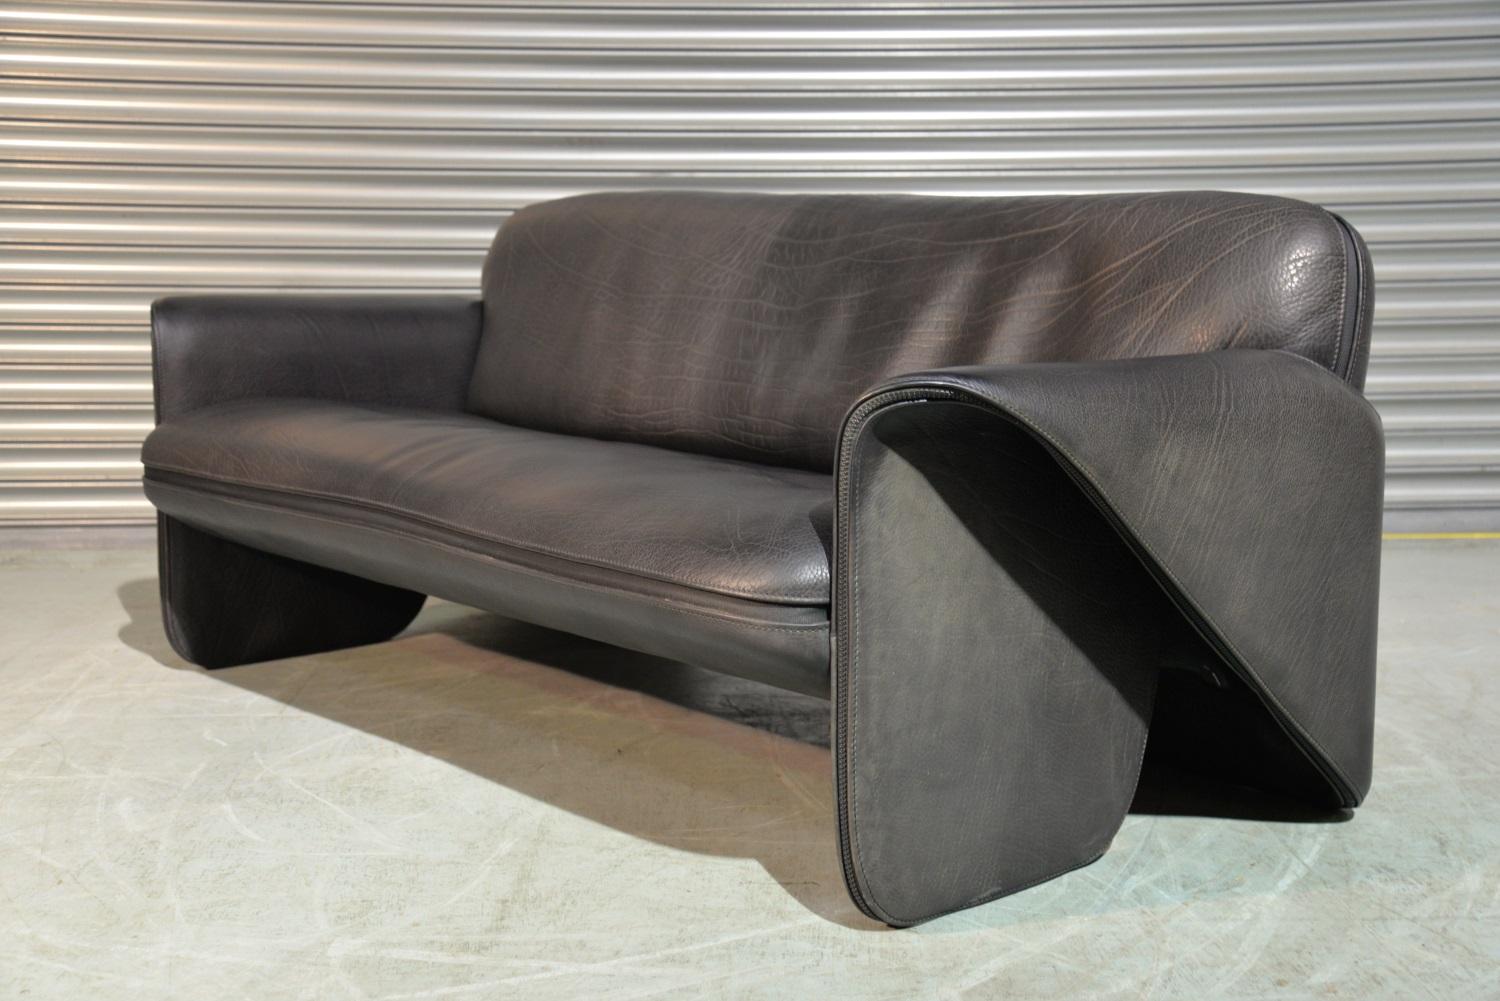 Discounted airfreight for our US and International Customers (from 2 weeks door to door) 

We are delighted to bring to you an ultra rare vintage De Sede DS 125 sofa designed by Gerd Lange in 1978. These sculptural pieces are upholstered in 3mm-5mm